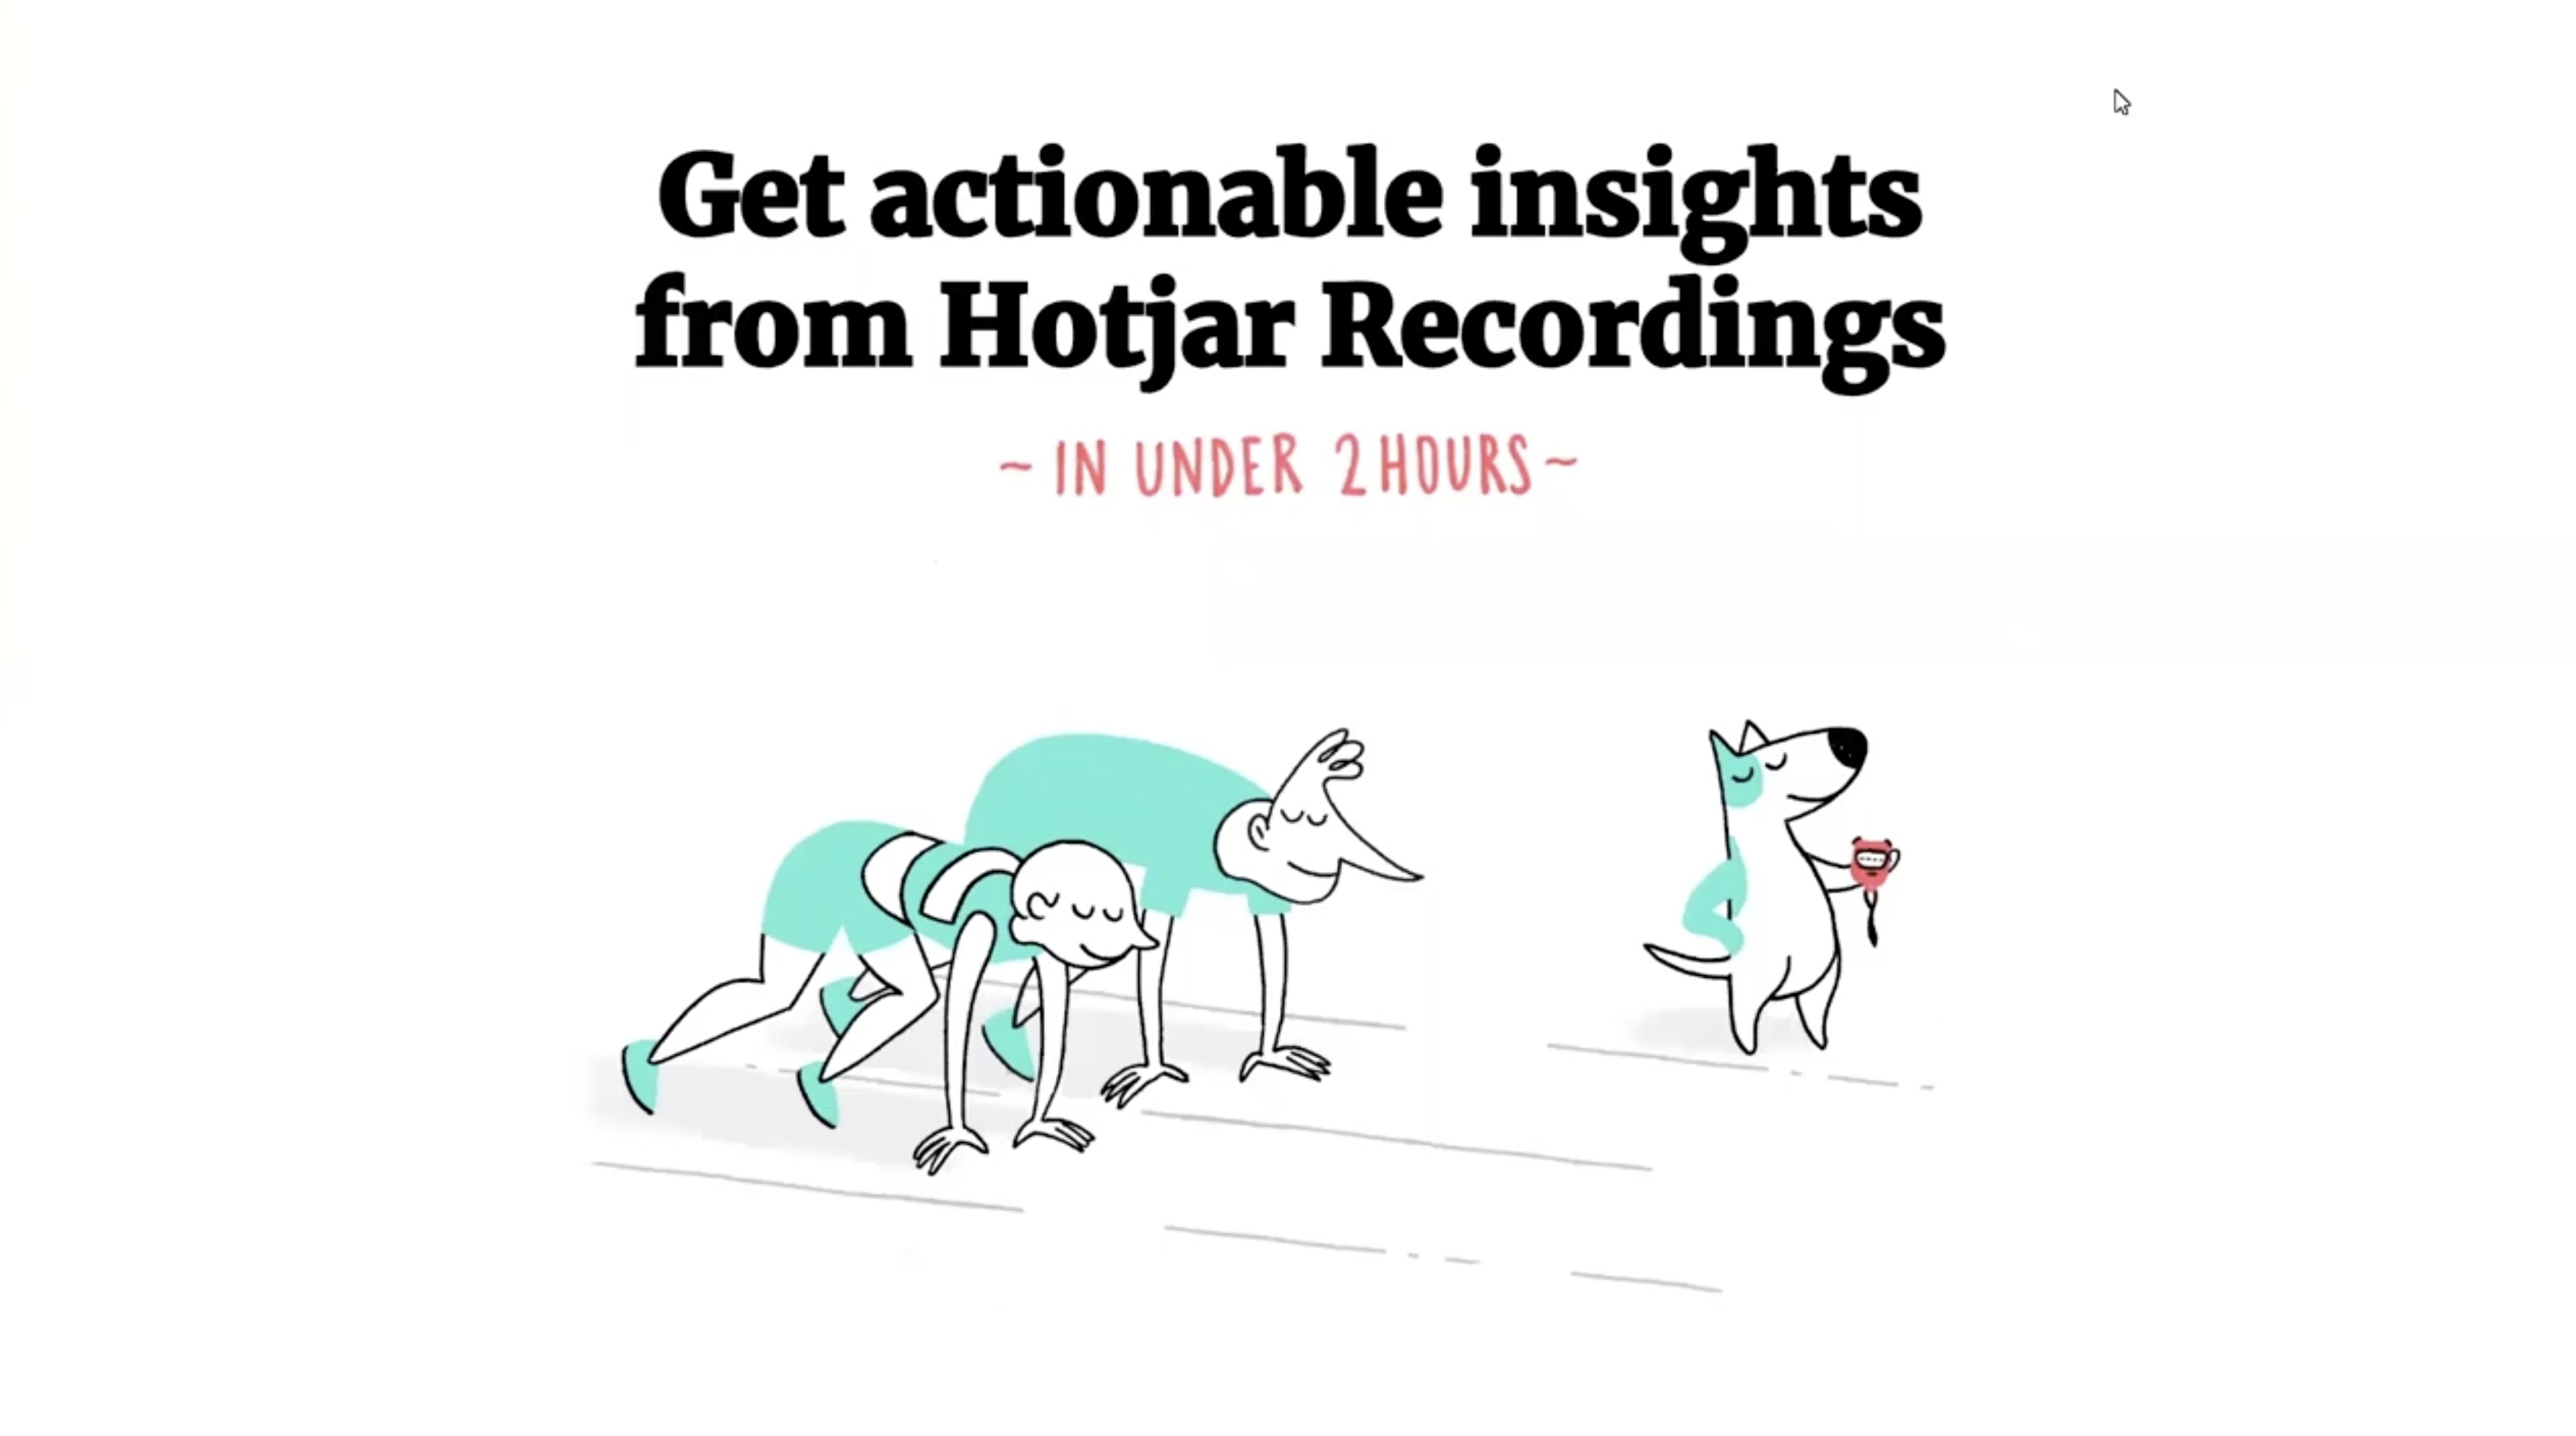 Hotjar Recordings webinar slide: Get Actionable Insights From Hotjar Recordings in Under 2 Hours. Illustration of two people prepared to run a race, with a dog holding a stopwatch.